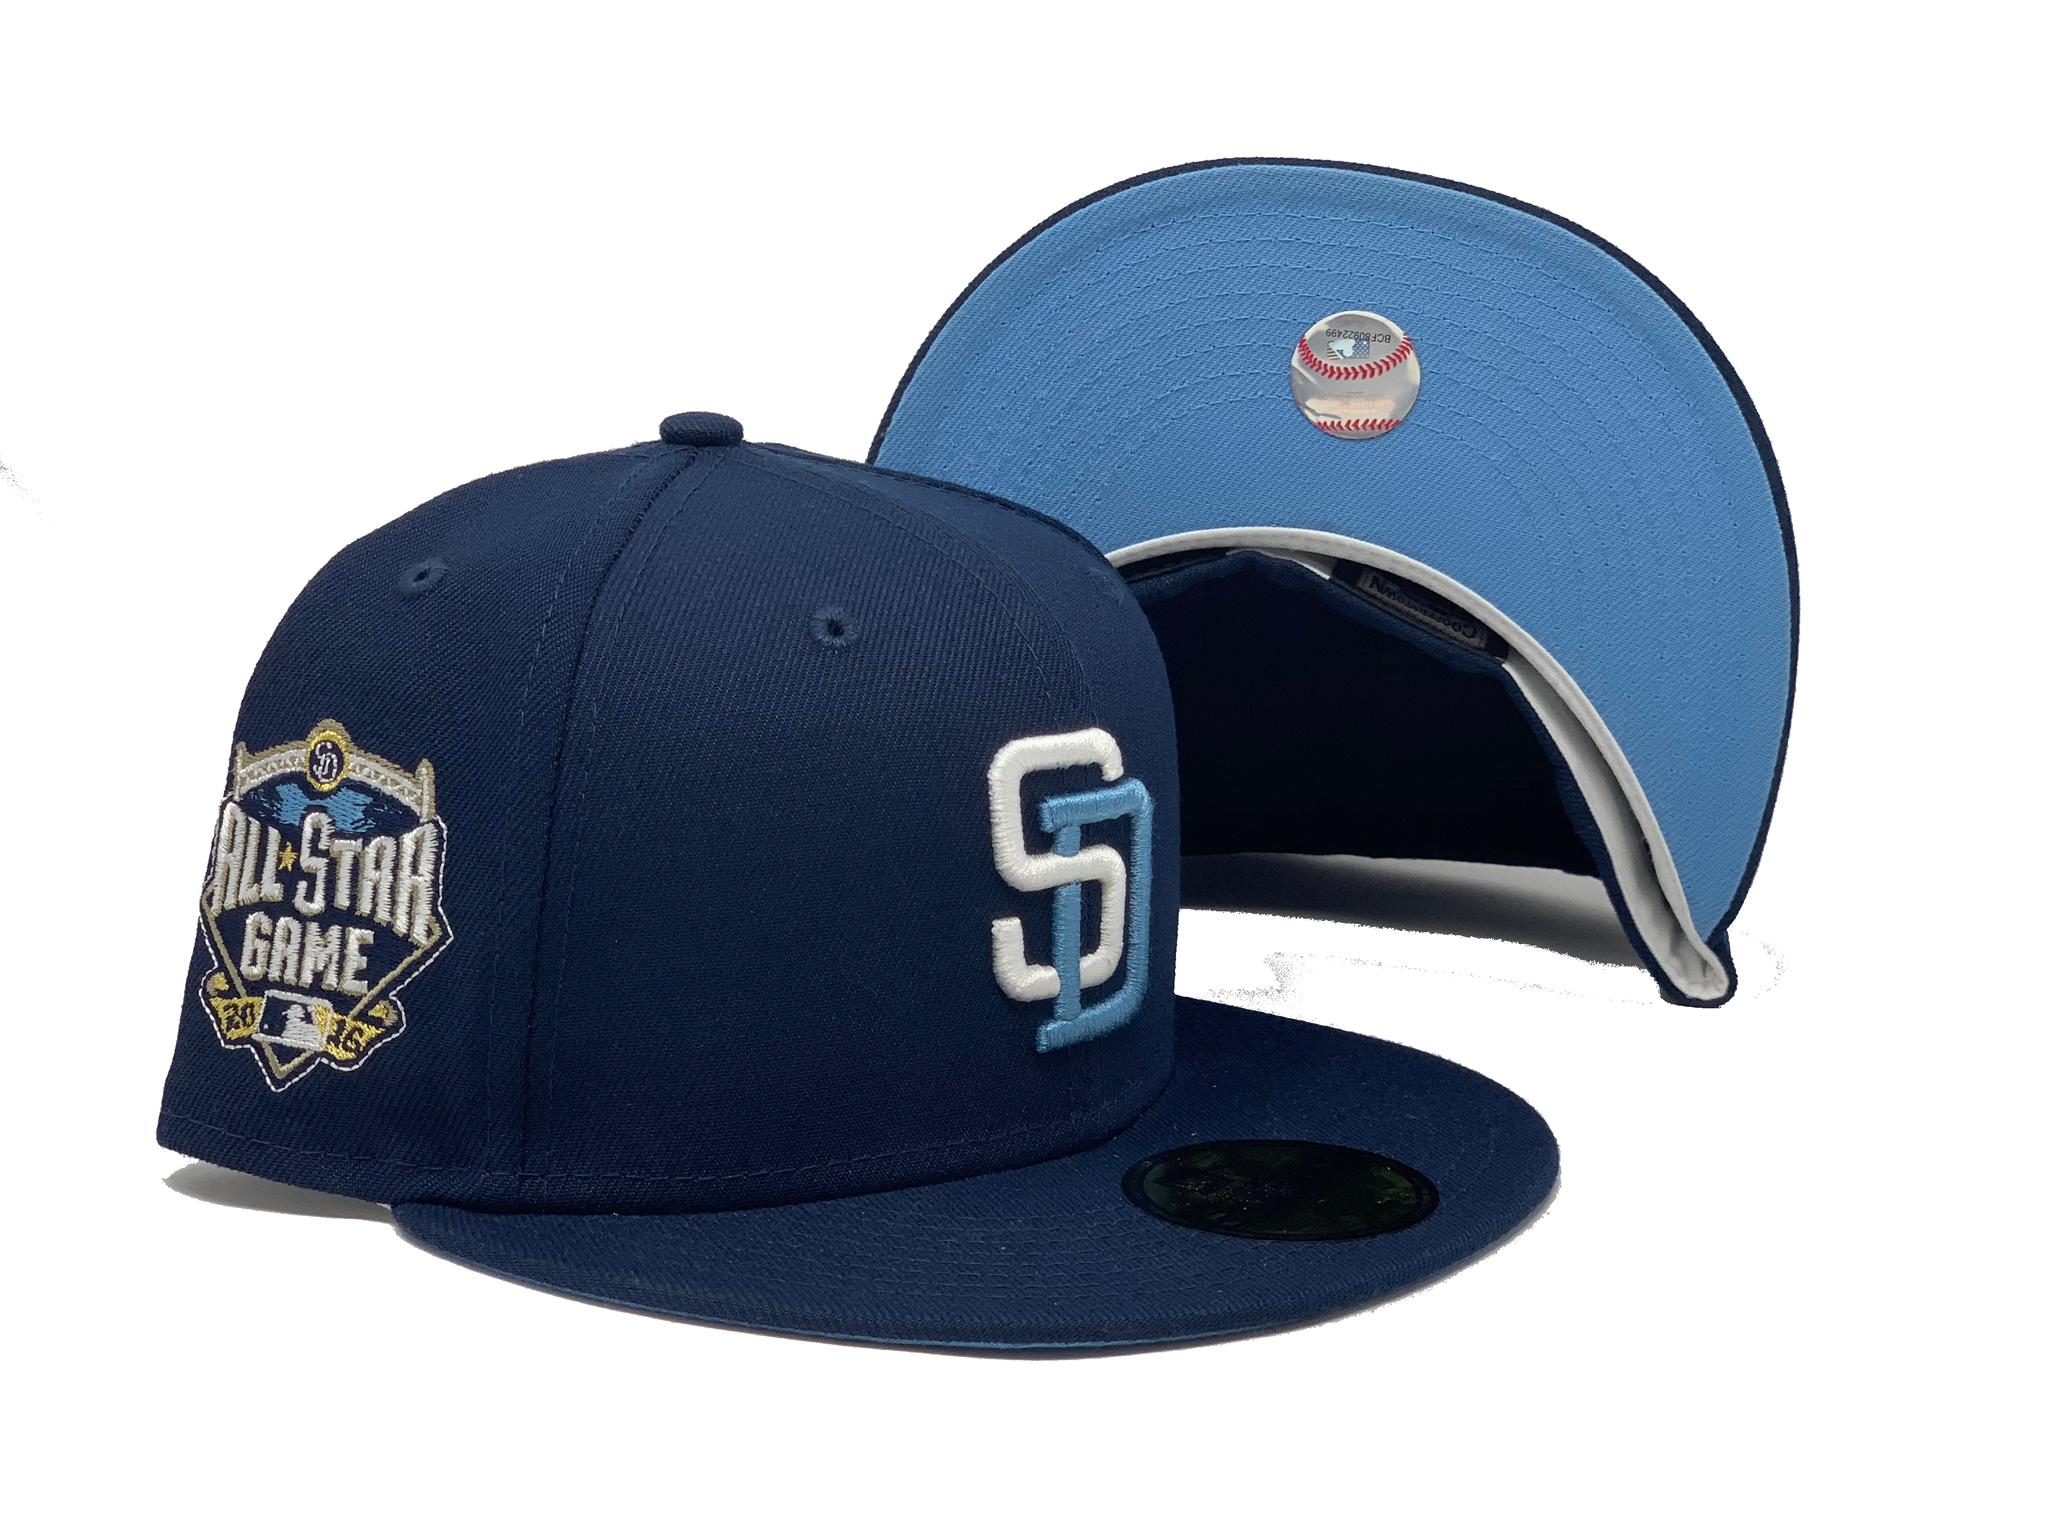 2016 All Star Game Hats from New Era, 59fifty on-field cap